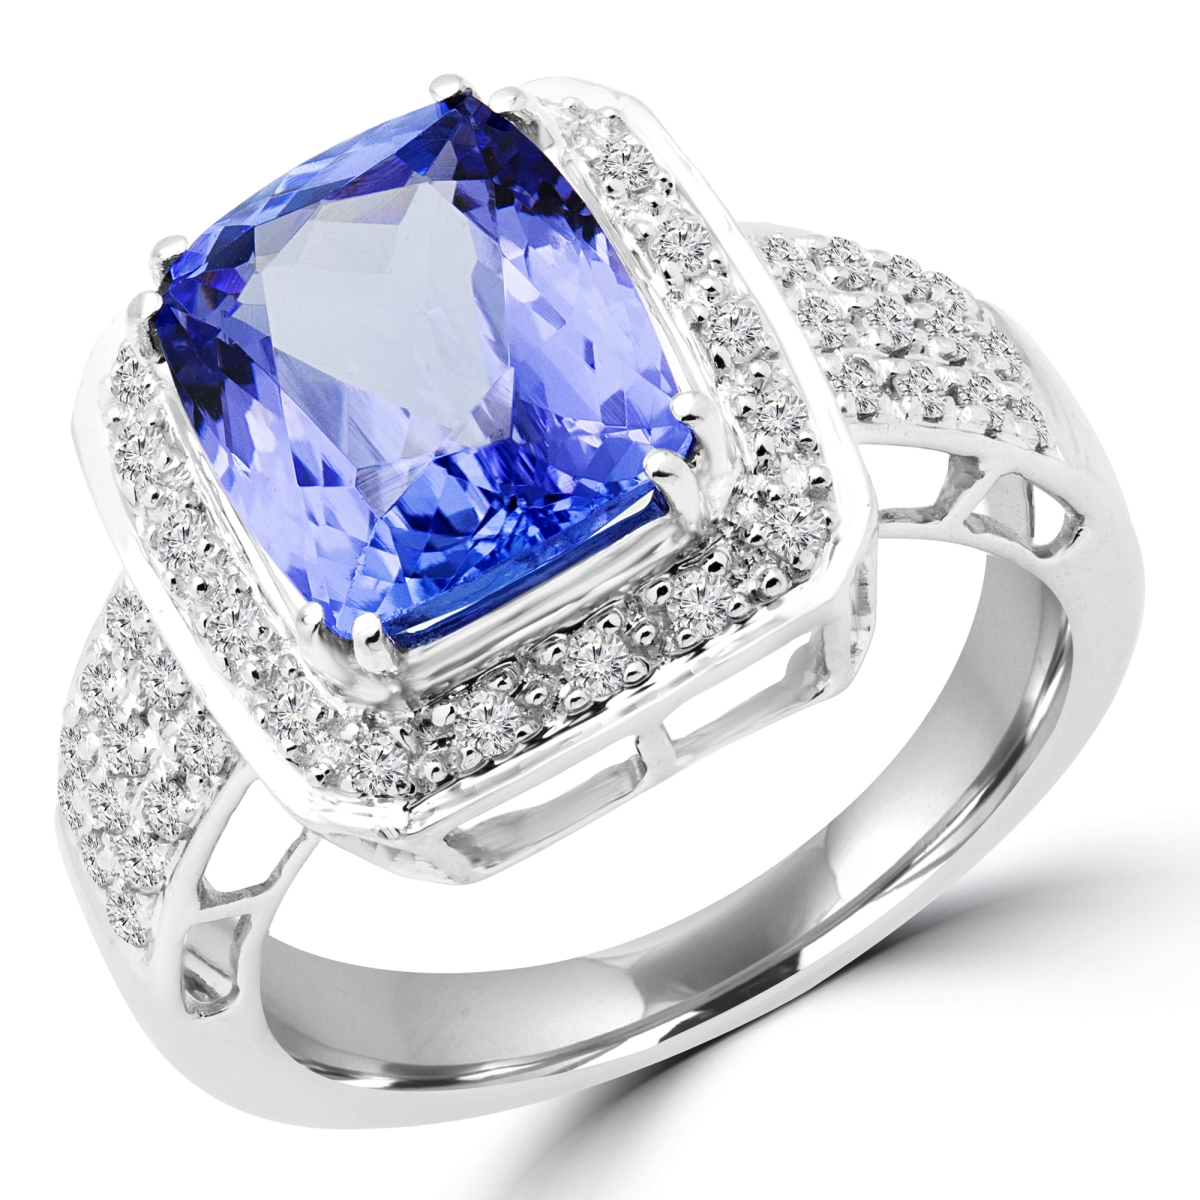 Picture of Majesty Diamonds MD180161-3.5 3.5 CTW Cushion Purple Tanzanite Halo Cocktail Ring in 14K White Gold - Size 3.5